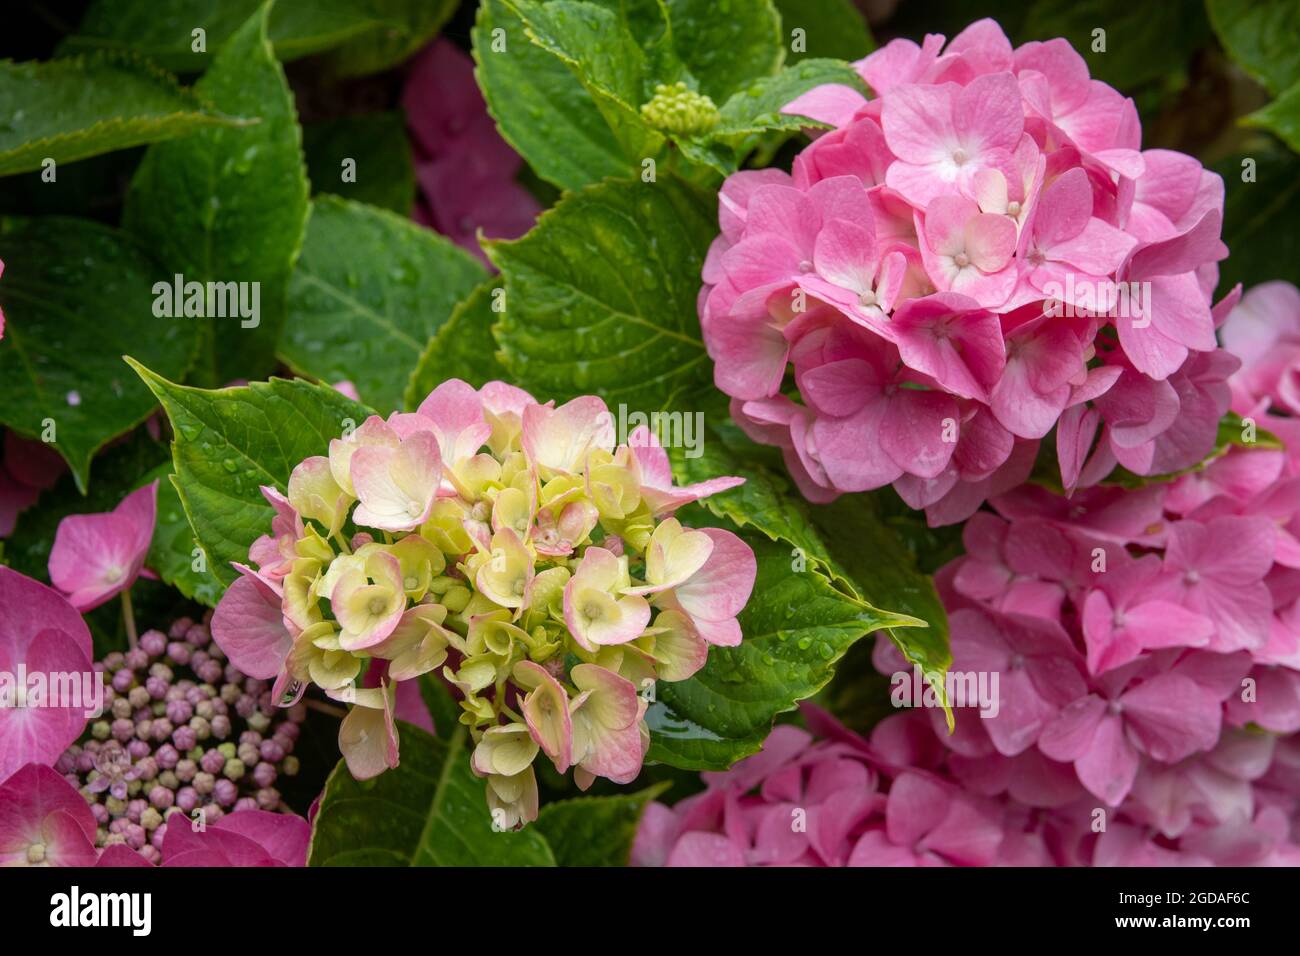 beautiful pink flowers of hydrangea macrophylla also known as lacecap hydrangea and christmas flower Stock Photo